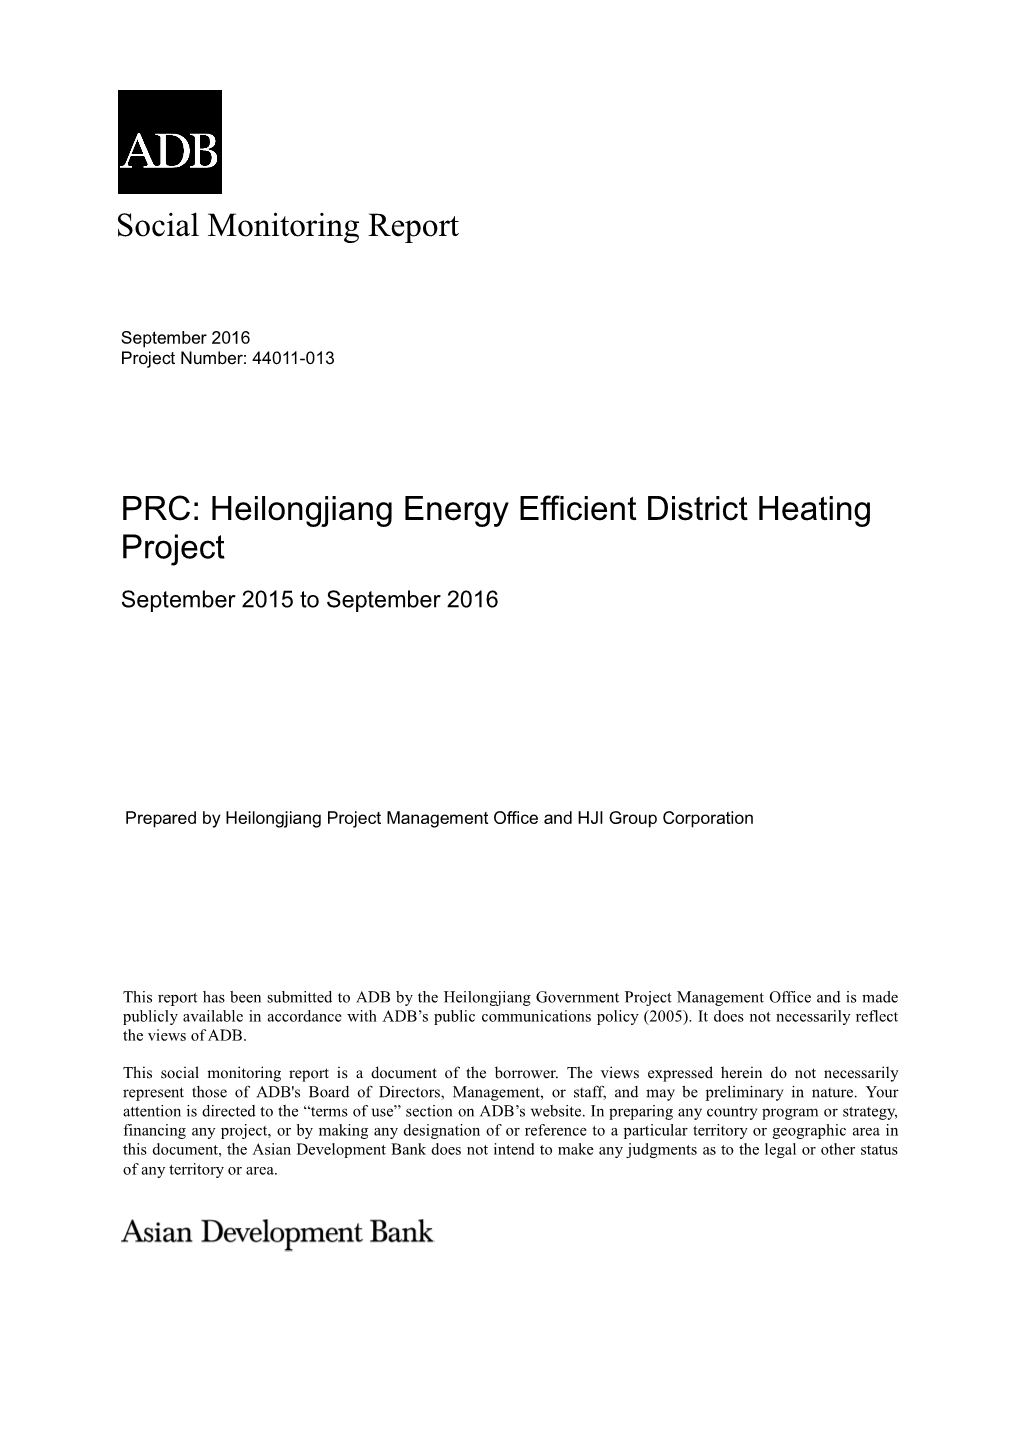 Social Monitoring Report PRC: Heilongjiang Energy Efficient District Heating Project